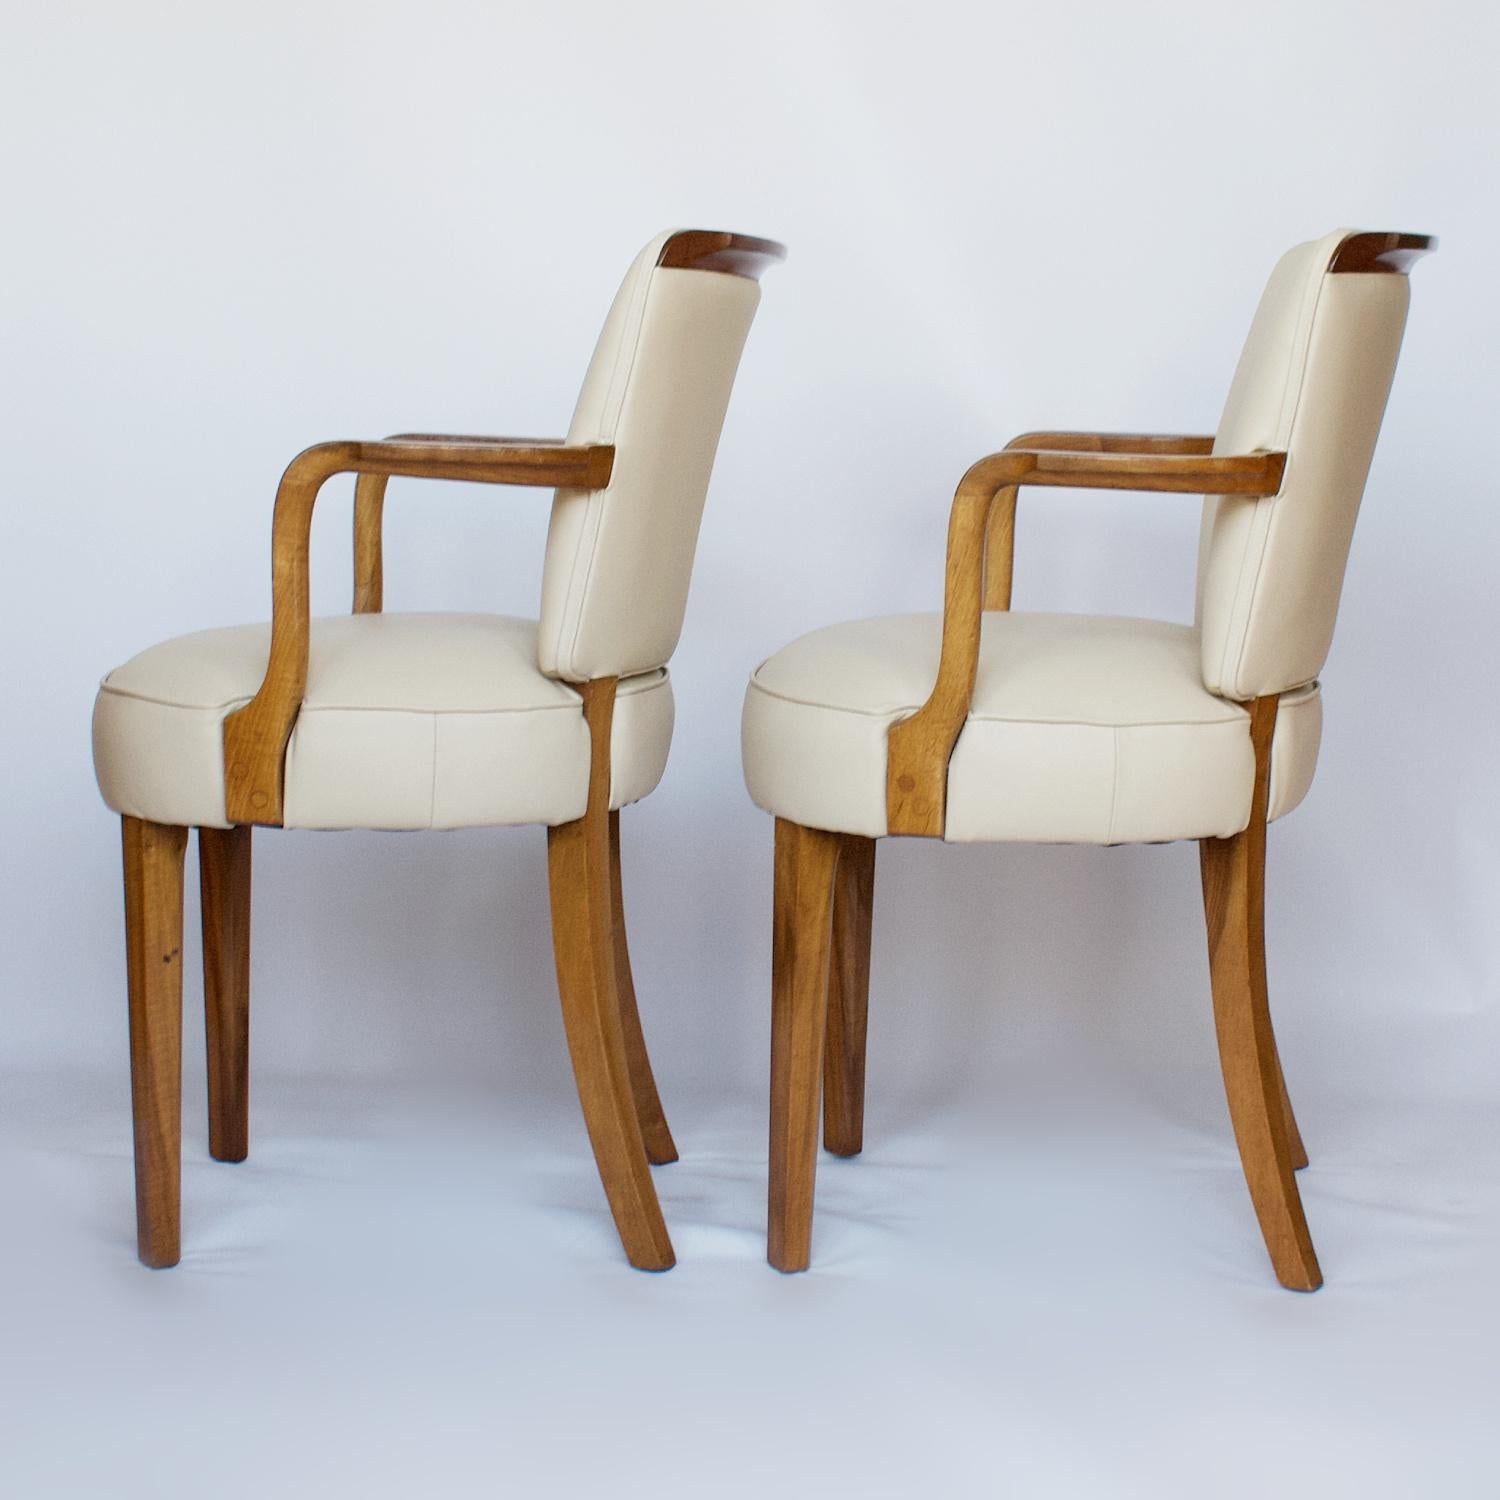 English Pair of Art Deco Desk Chairs by Heal's of London, circa 1930